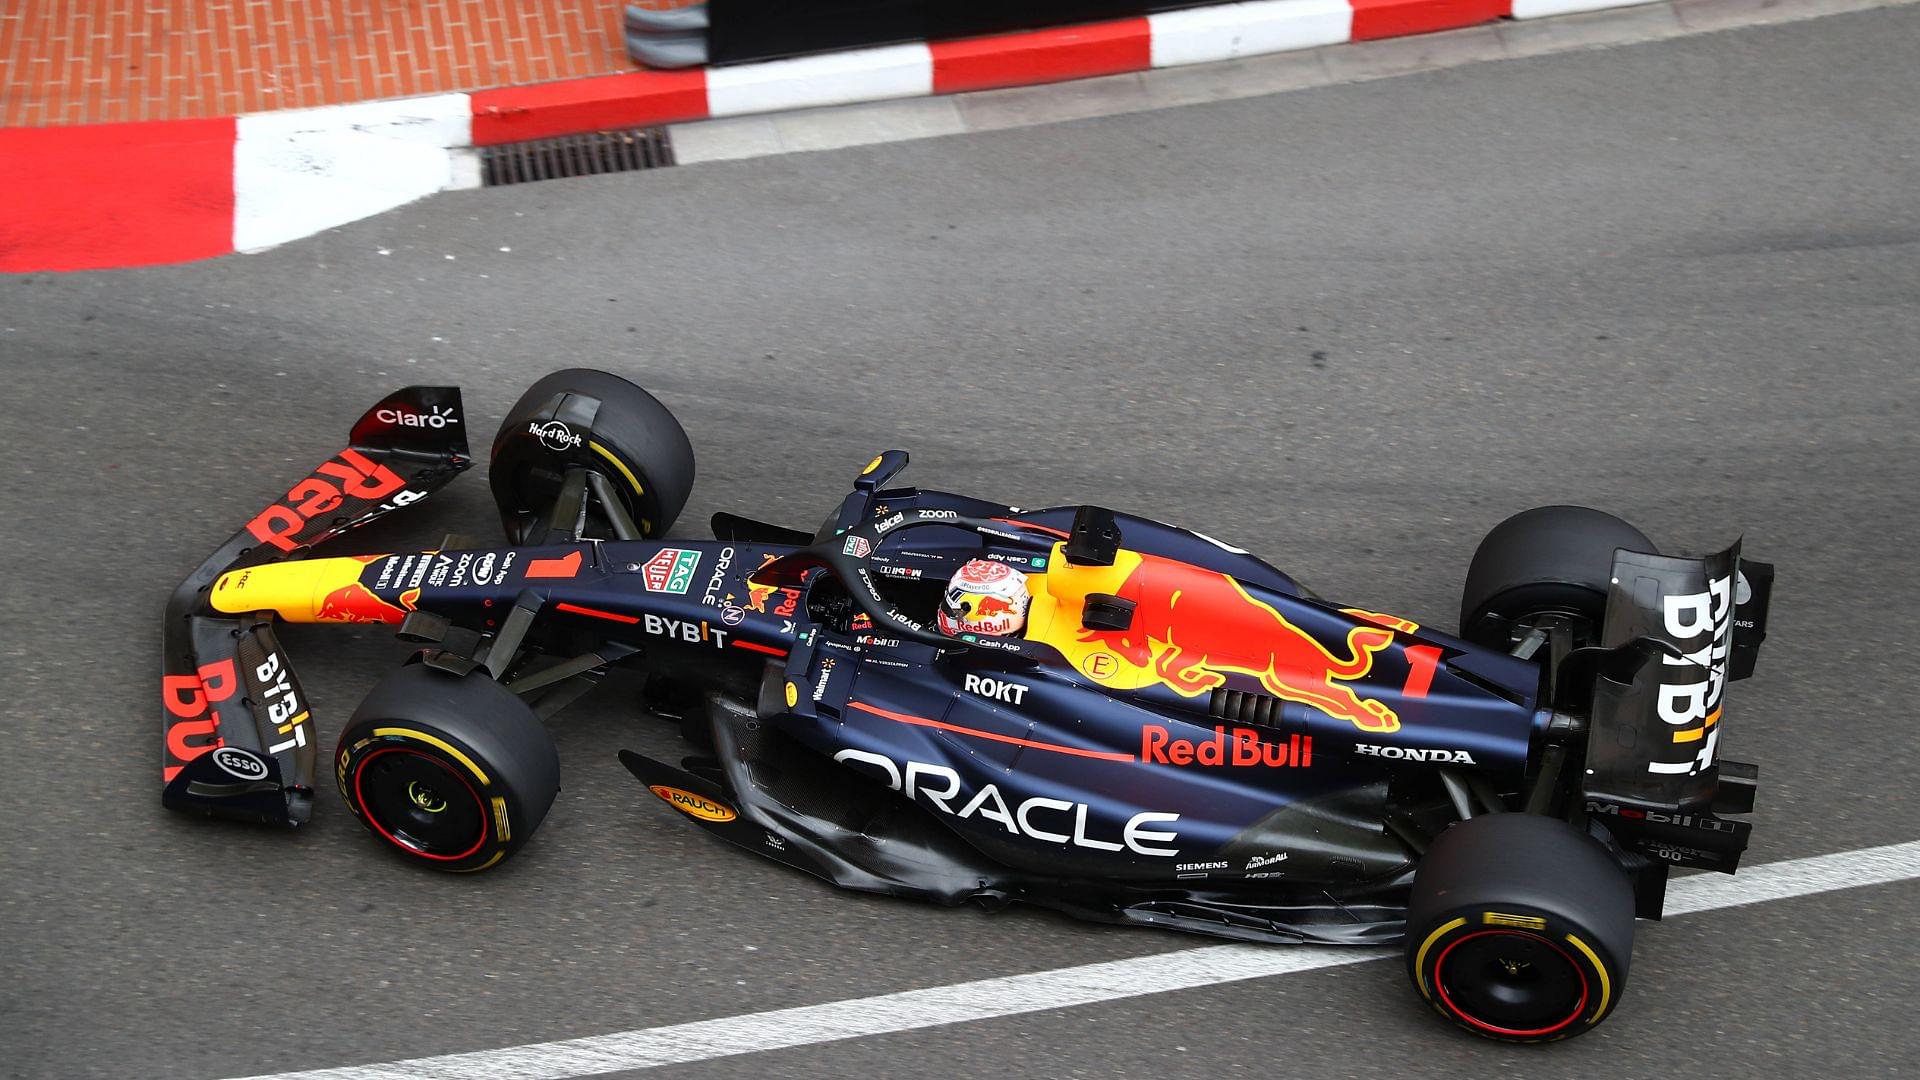 A Decimal Point Could Mark the End of Red Bull’s Dominance at the Monaco GP